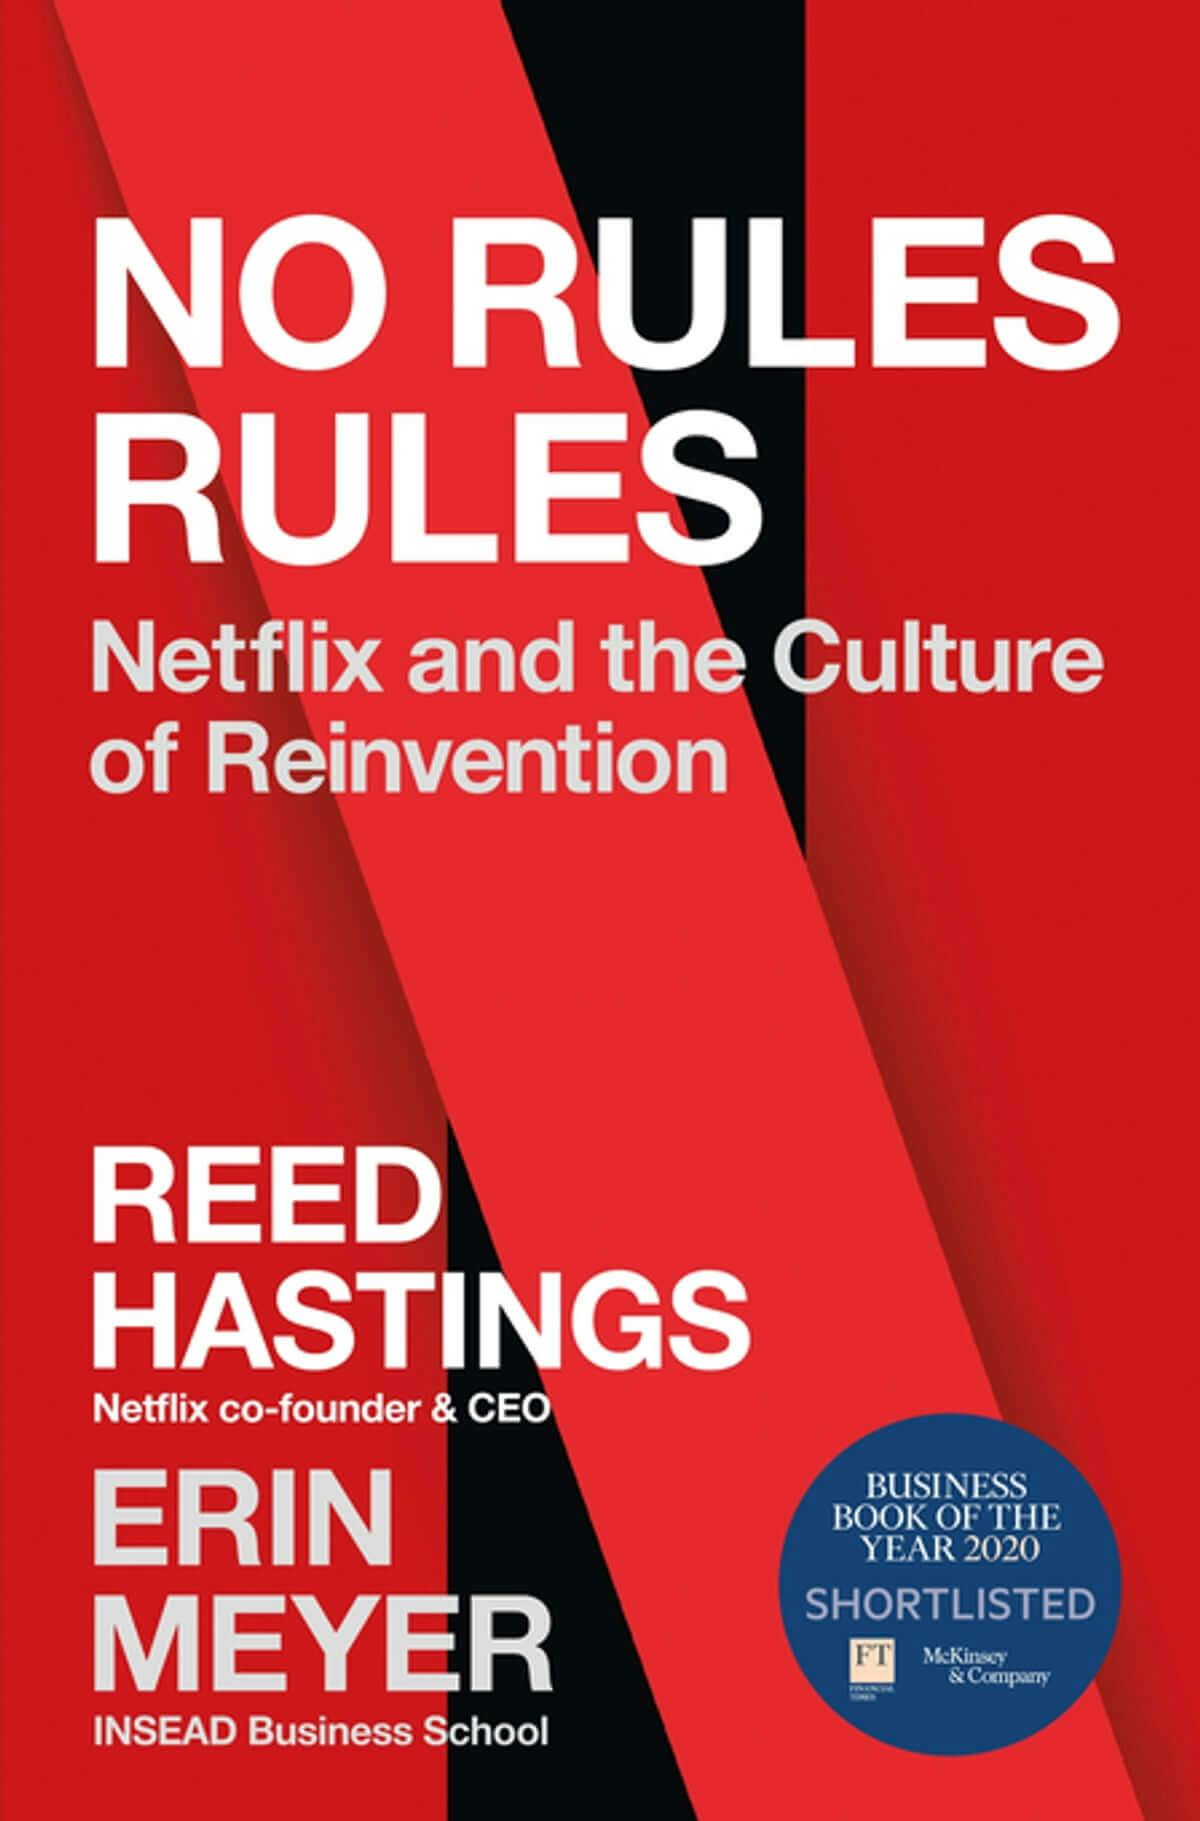 No Rules Rules: Netflix and the Culture of Reinvention - Reed Hastings and Erin Meyer